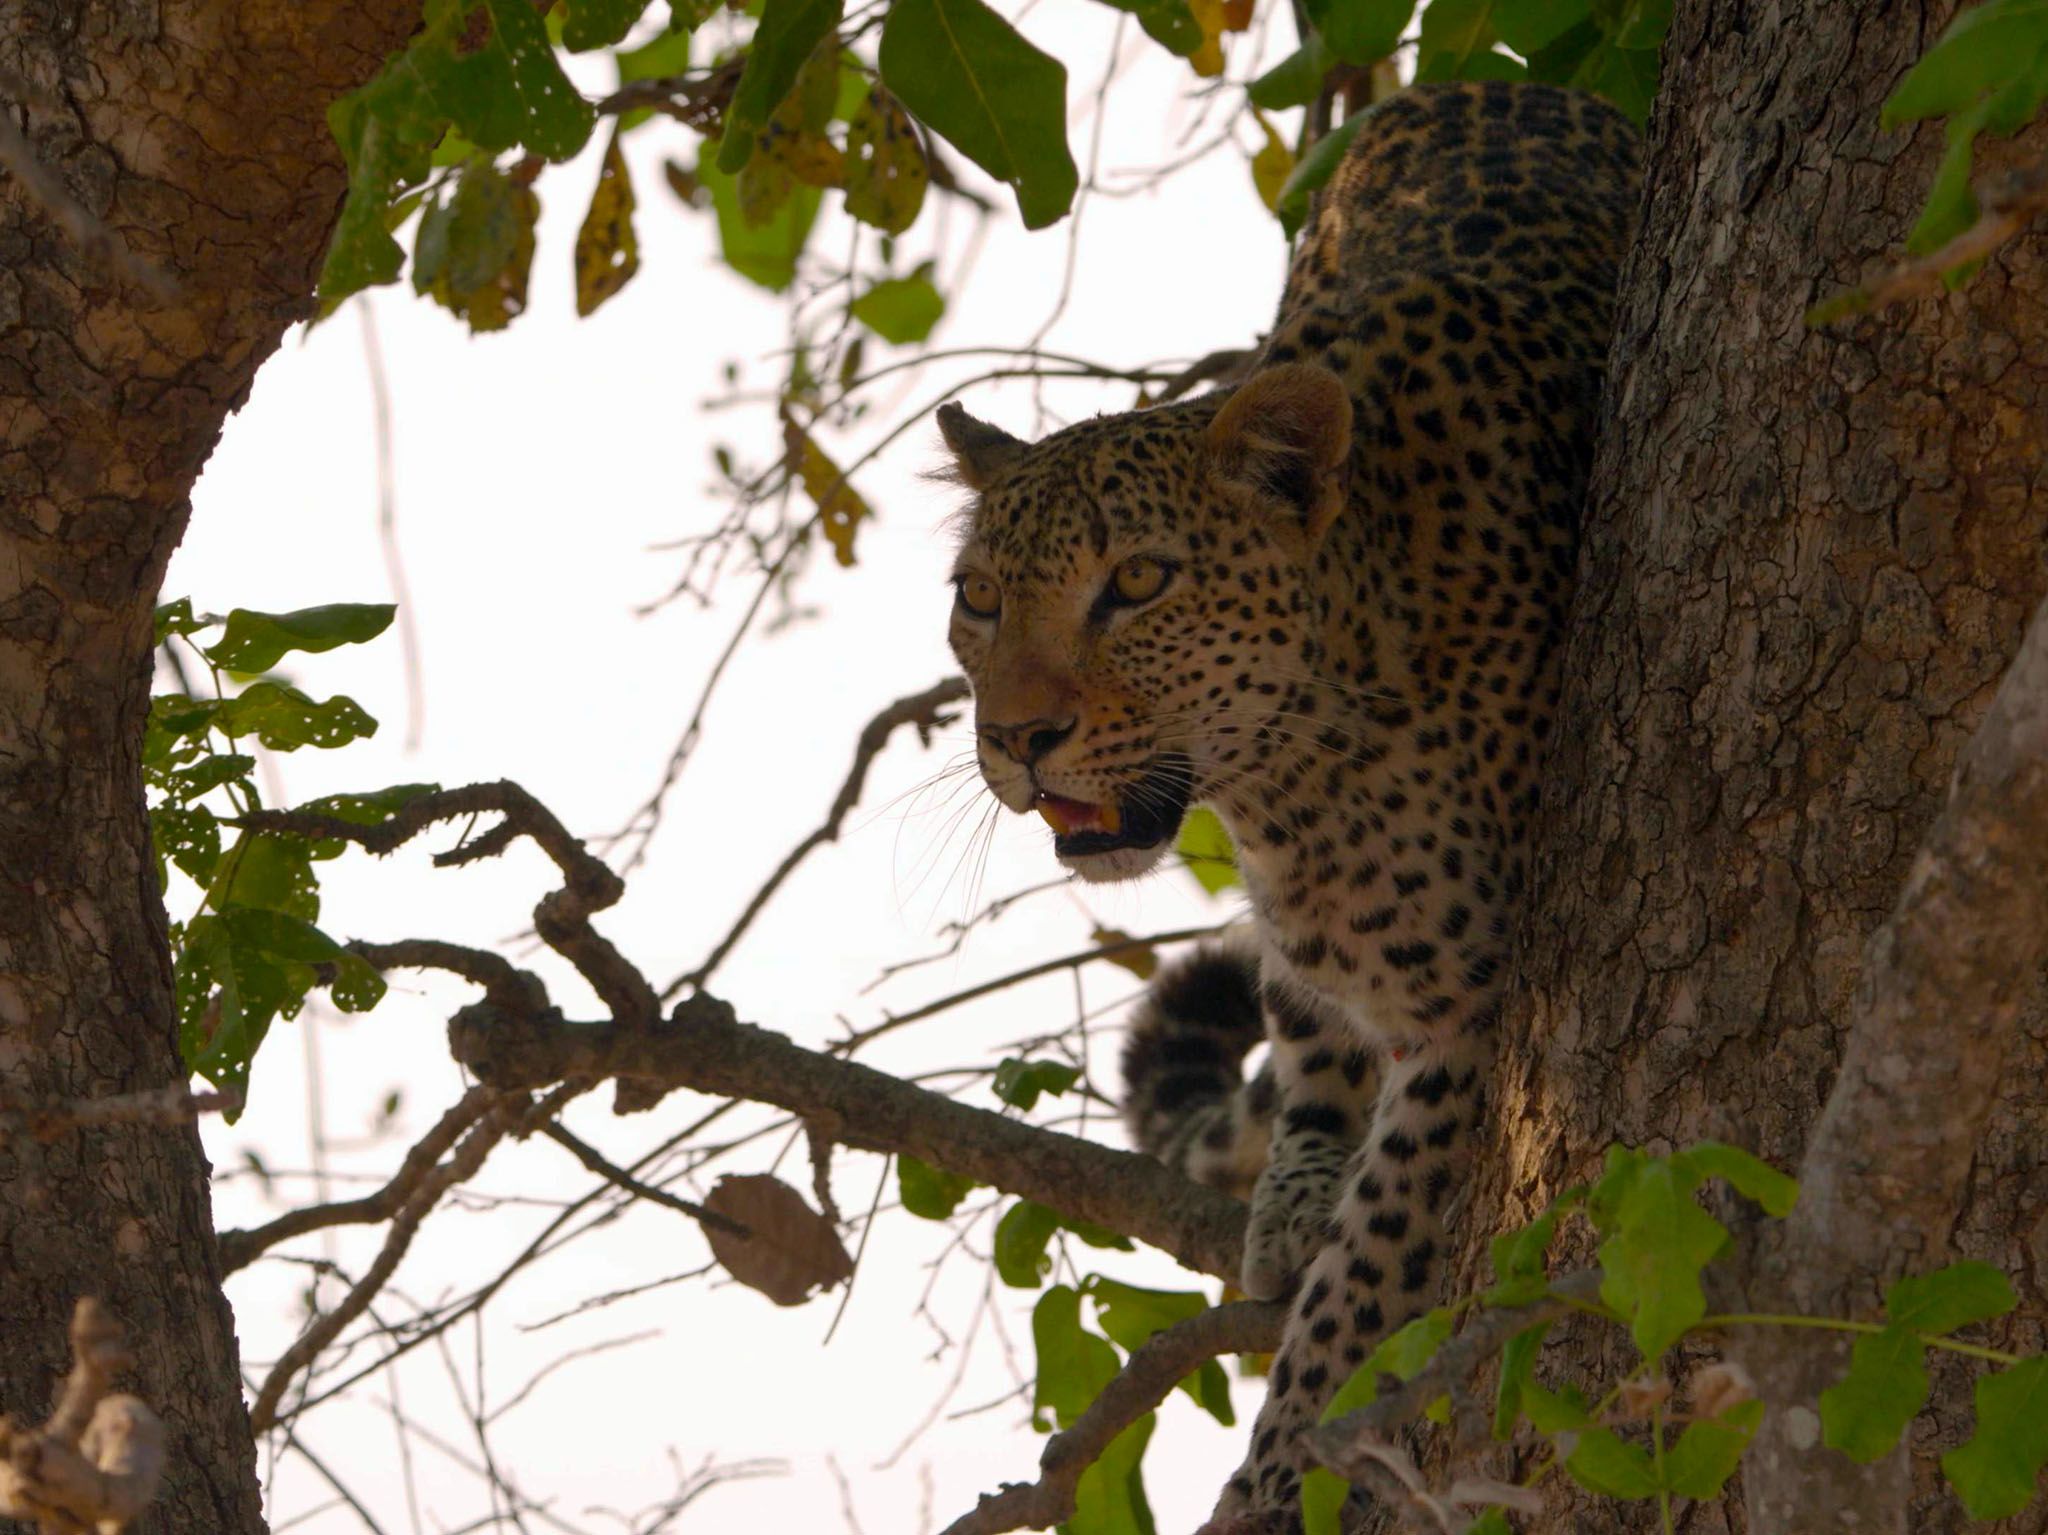 Male Leopard up on a branch. This image is from Africa's Hunters. [Photo of the day - February 2018]